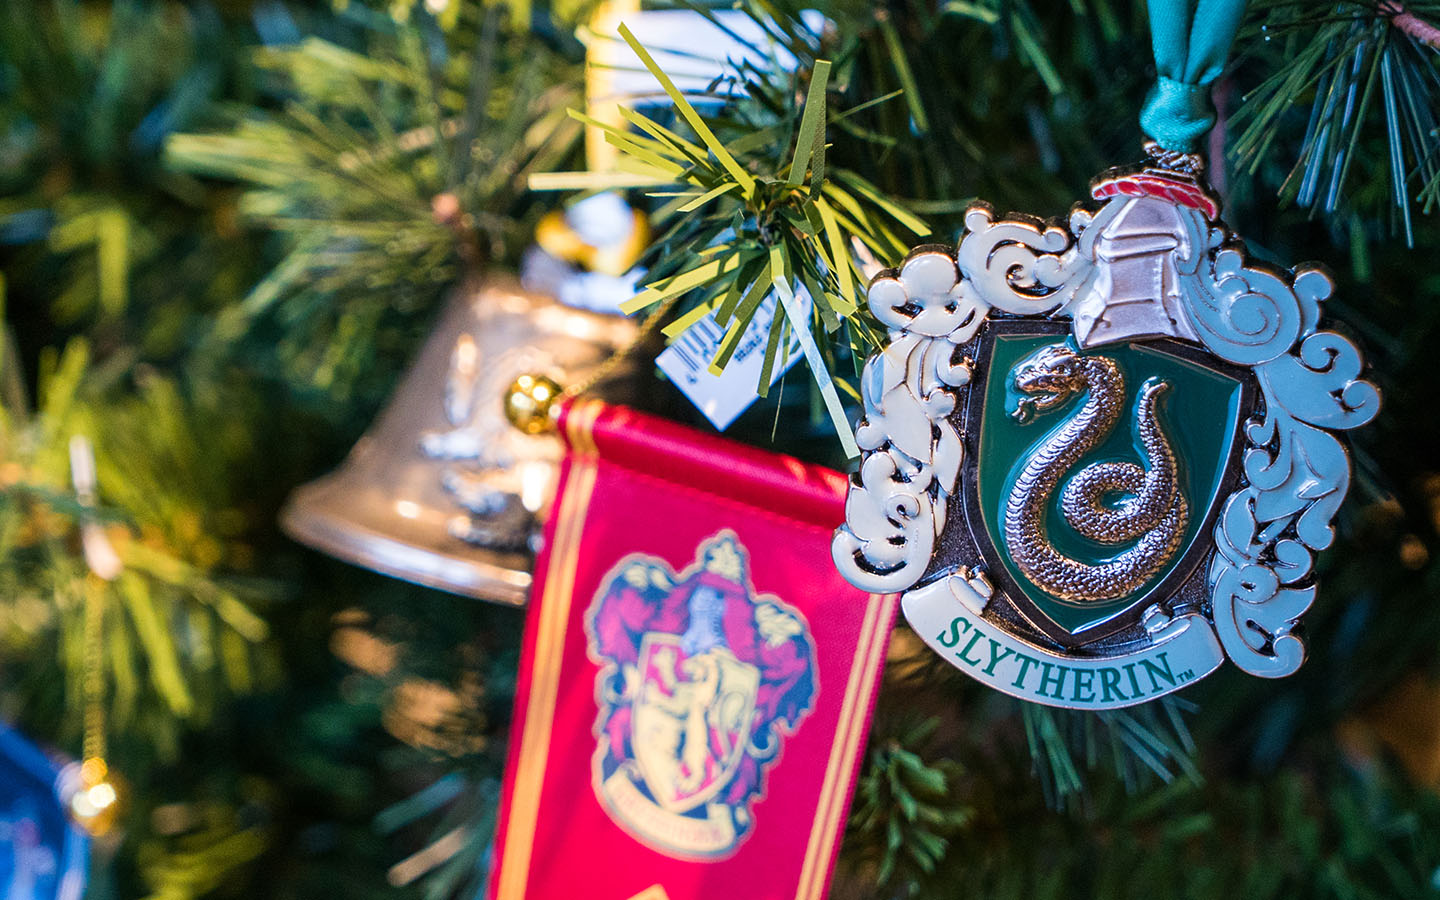 Slytherin Crest Ornament from The Wizarding World of Harry Potter